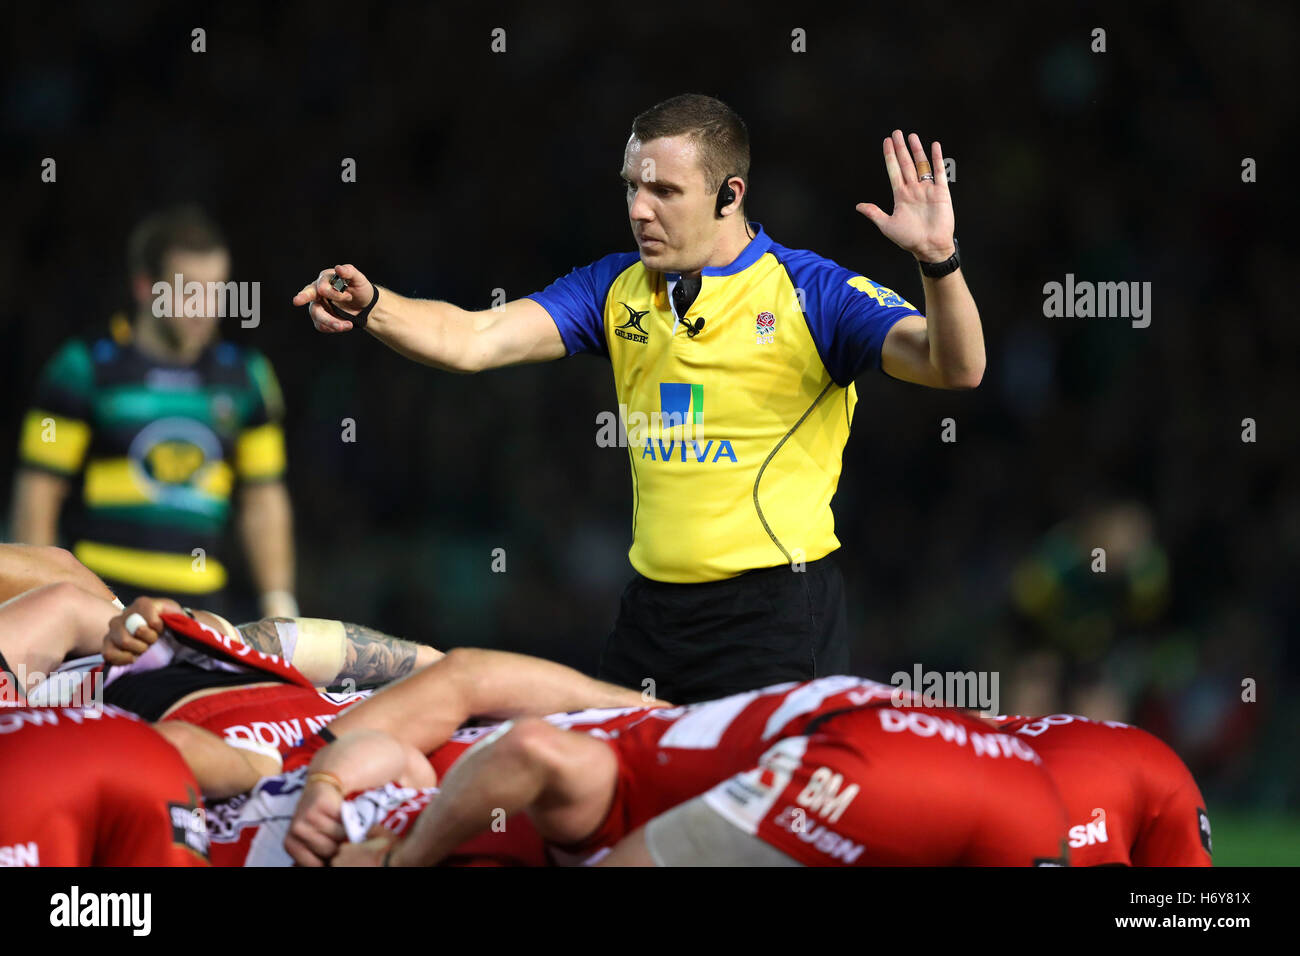 Referee Tom Foley during the Aviva Premiership match at Franklin's Gardens, Northampton. PRESS ASSOCIATION Photo. Picture date: Friday October 28, 2016. See PA story RUGBYU Northampton. Photo credit should read: David Davies/PA Wire. RESTRICTIONS: Use subject to restrictions. Editorial use only. No commercial use. Stock Photo